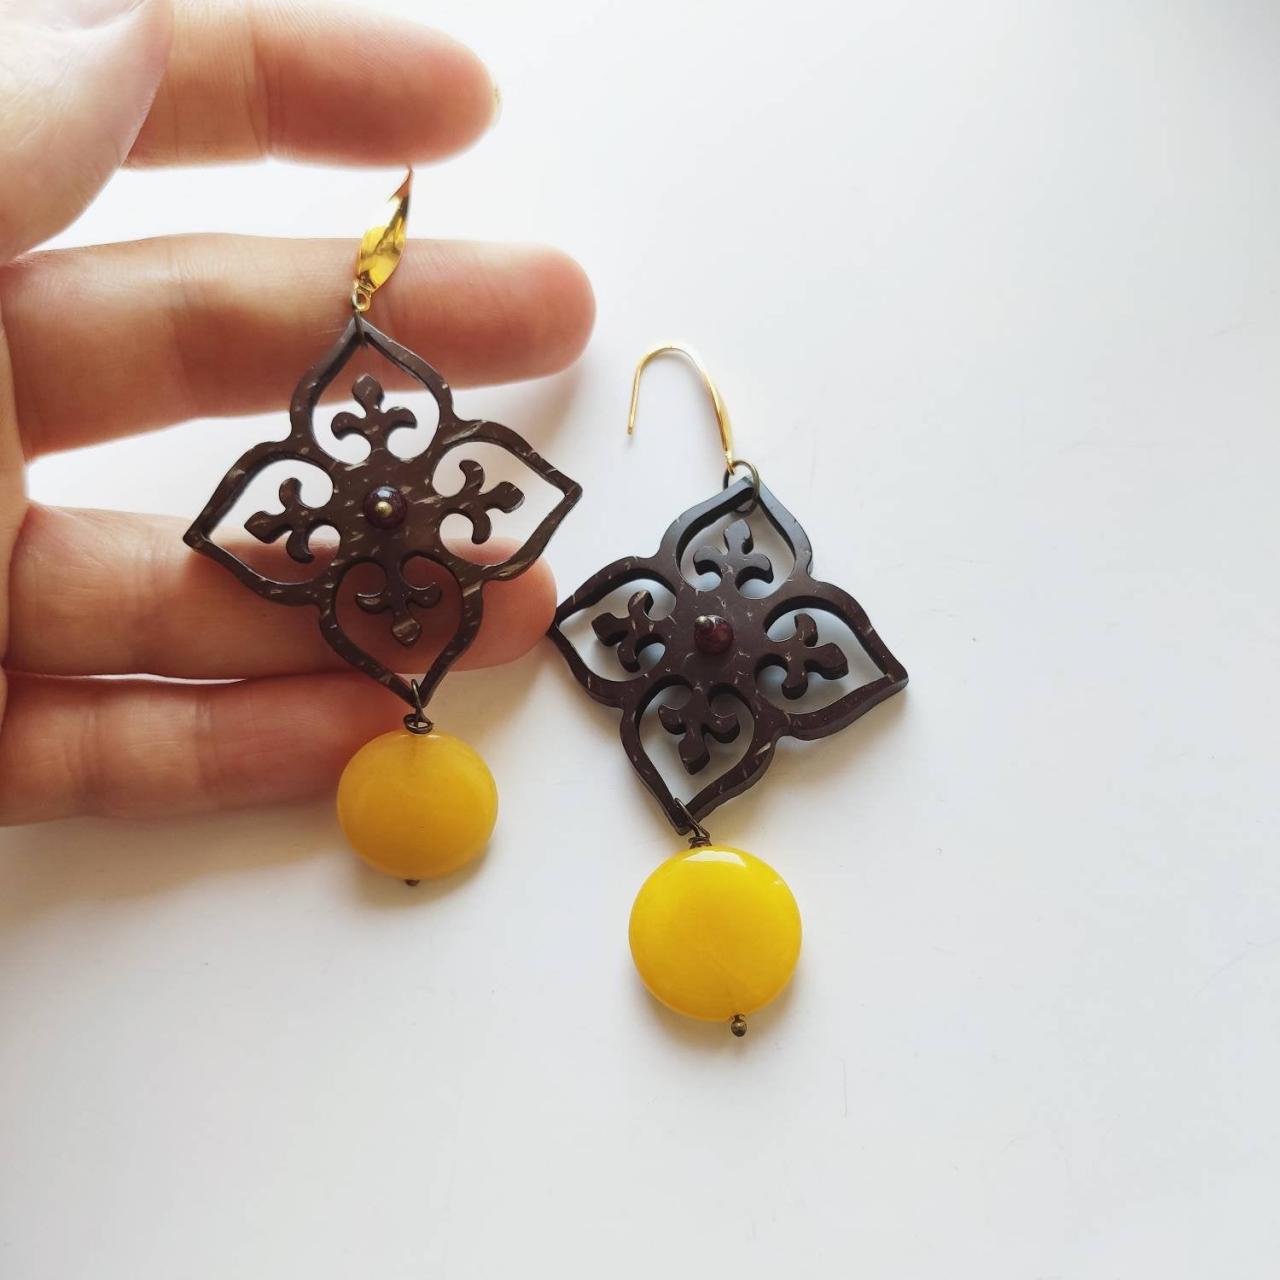 Arab Flower-shaped Dangling Earrings With Gold Steel Pin And Yellow Jade Stone